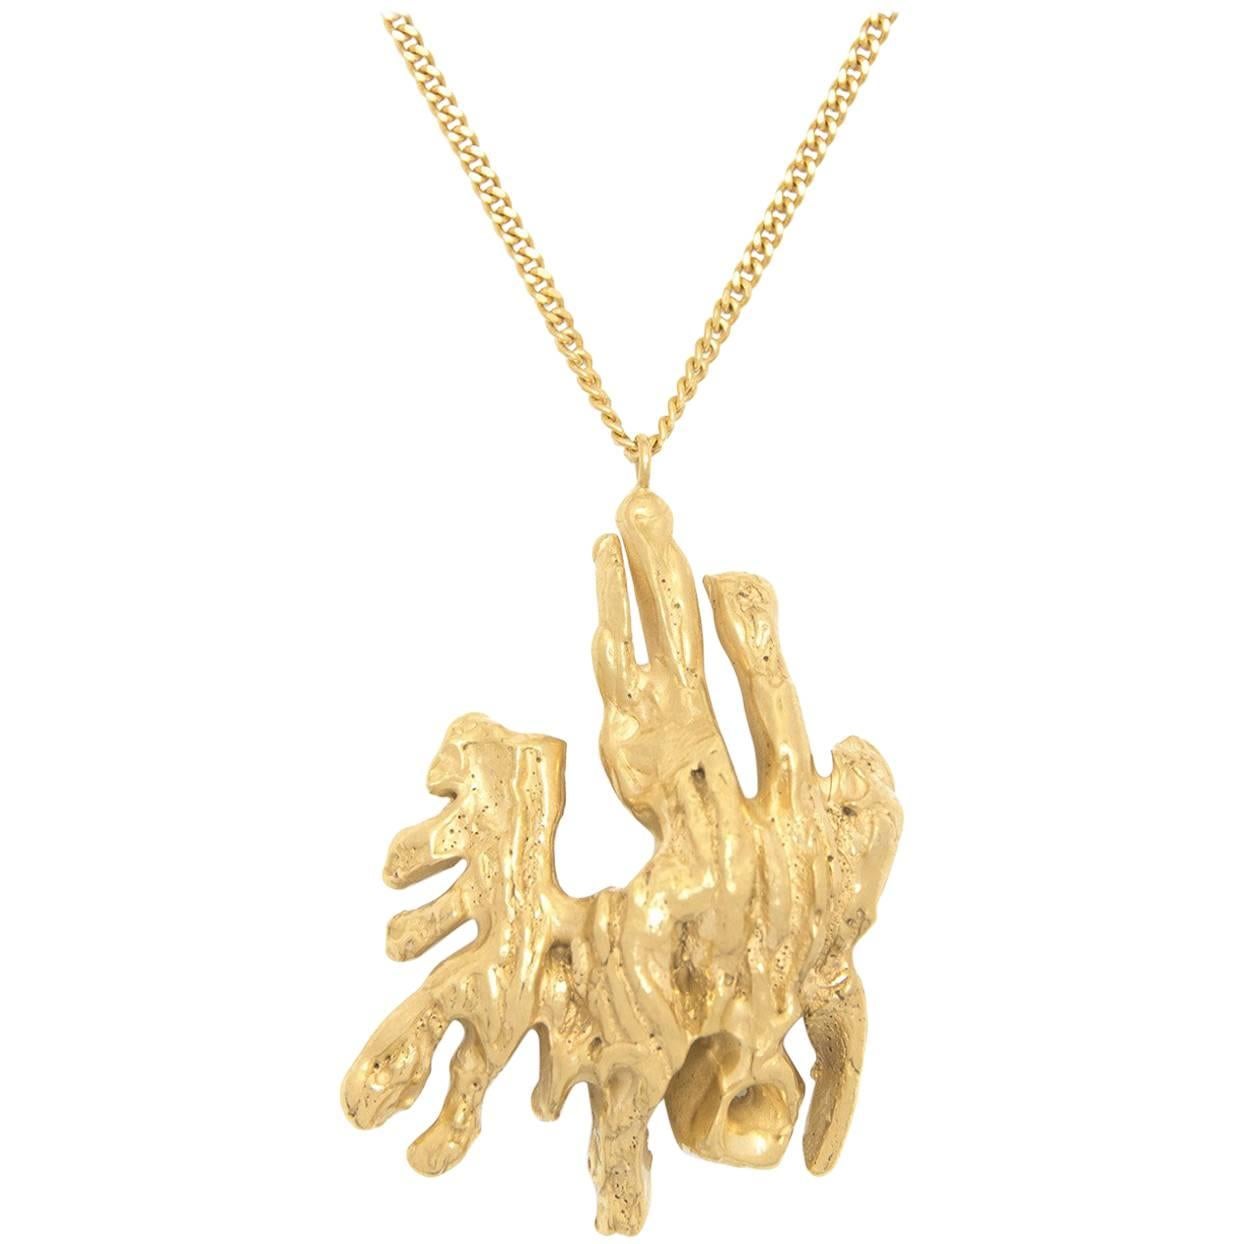 Loveness Lee - Chinese Zodiac Pig - Horoscope Gold Pendant Necklace  For Sale